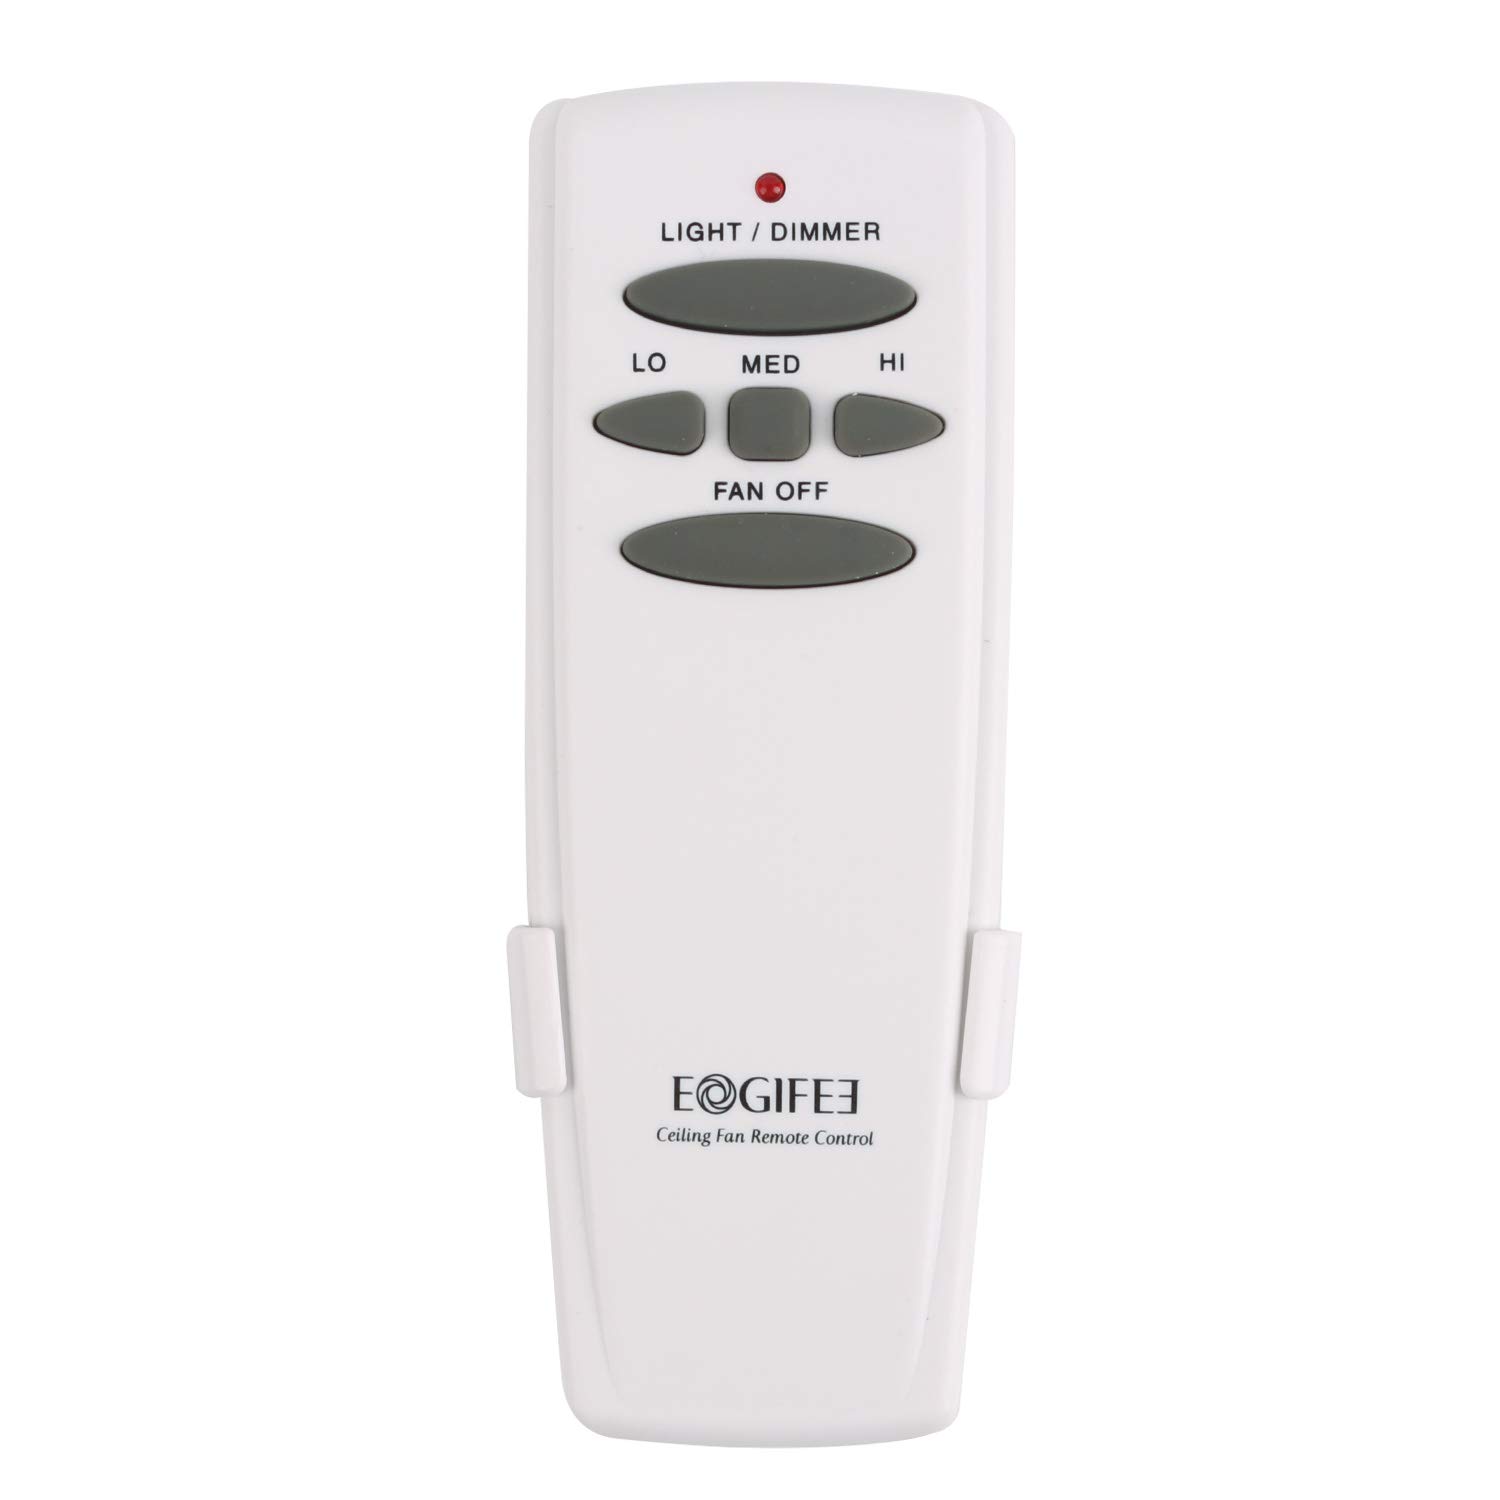 Eogifee Universal Ceiling Fan Remote Control and Receiver Kit with Timer Replacement of Hampton Bay or Harbor Breeze Kit ASIN:B072C7CTPN  UPC:729680110075